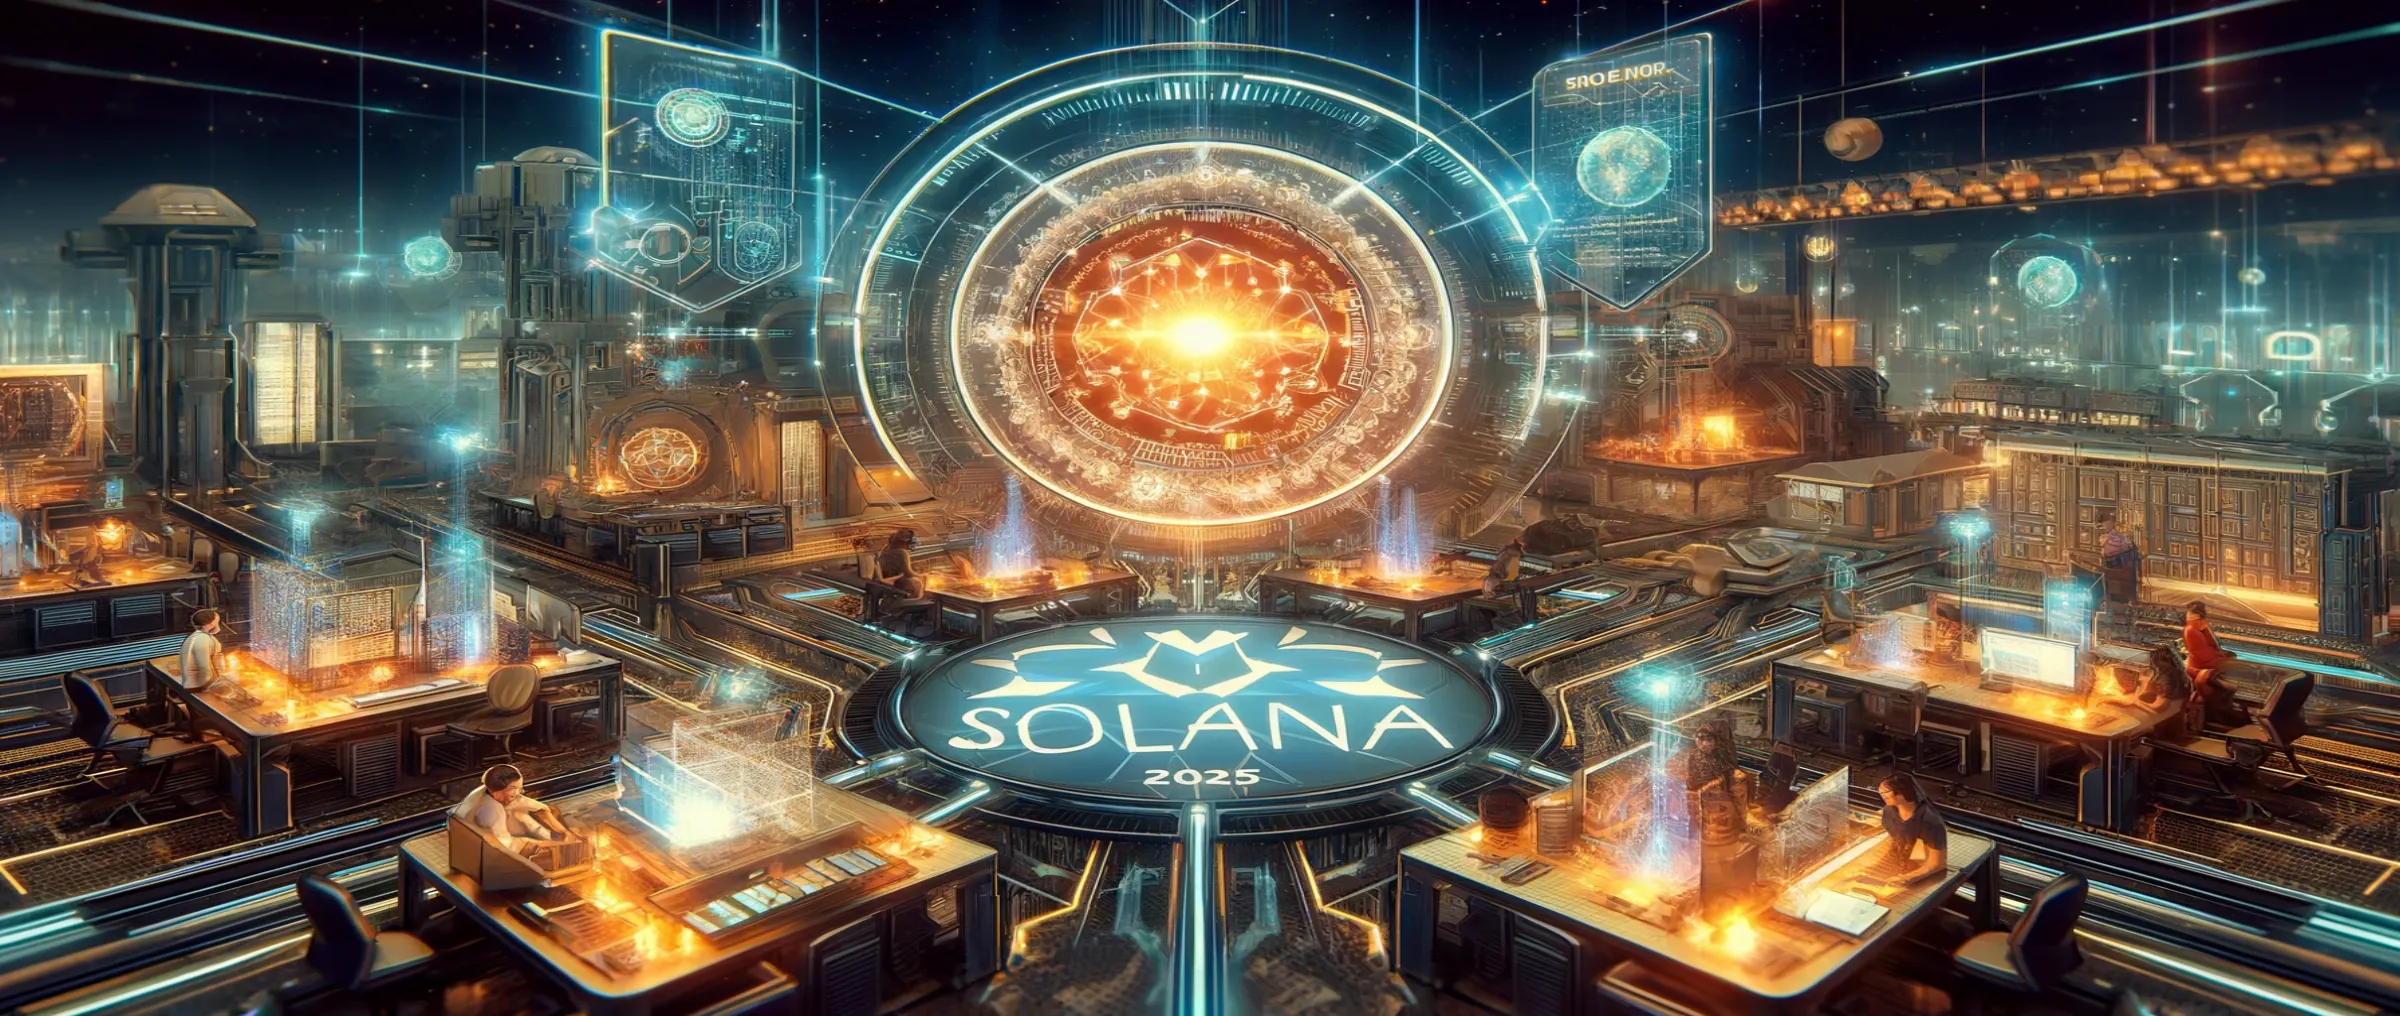 Solana intends to deploy Firedancer in 2025 amid increasing DePIN activity